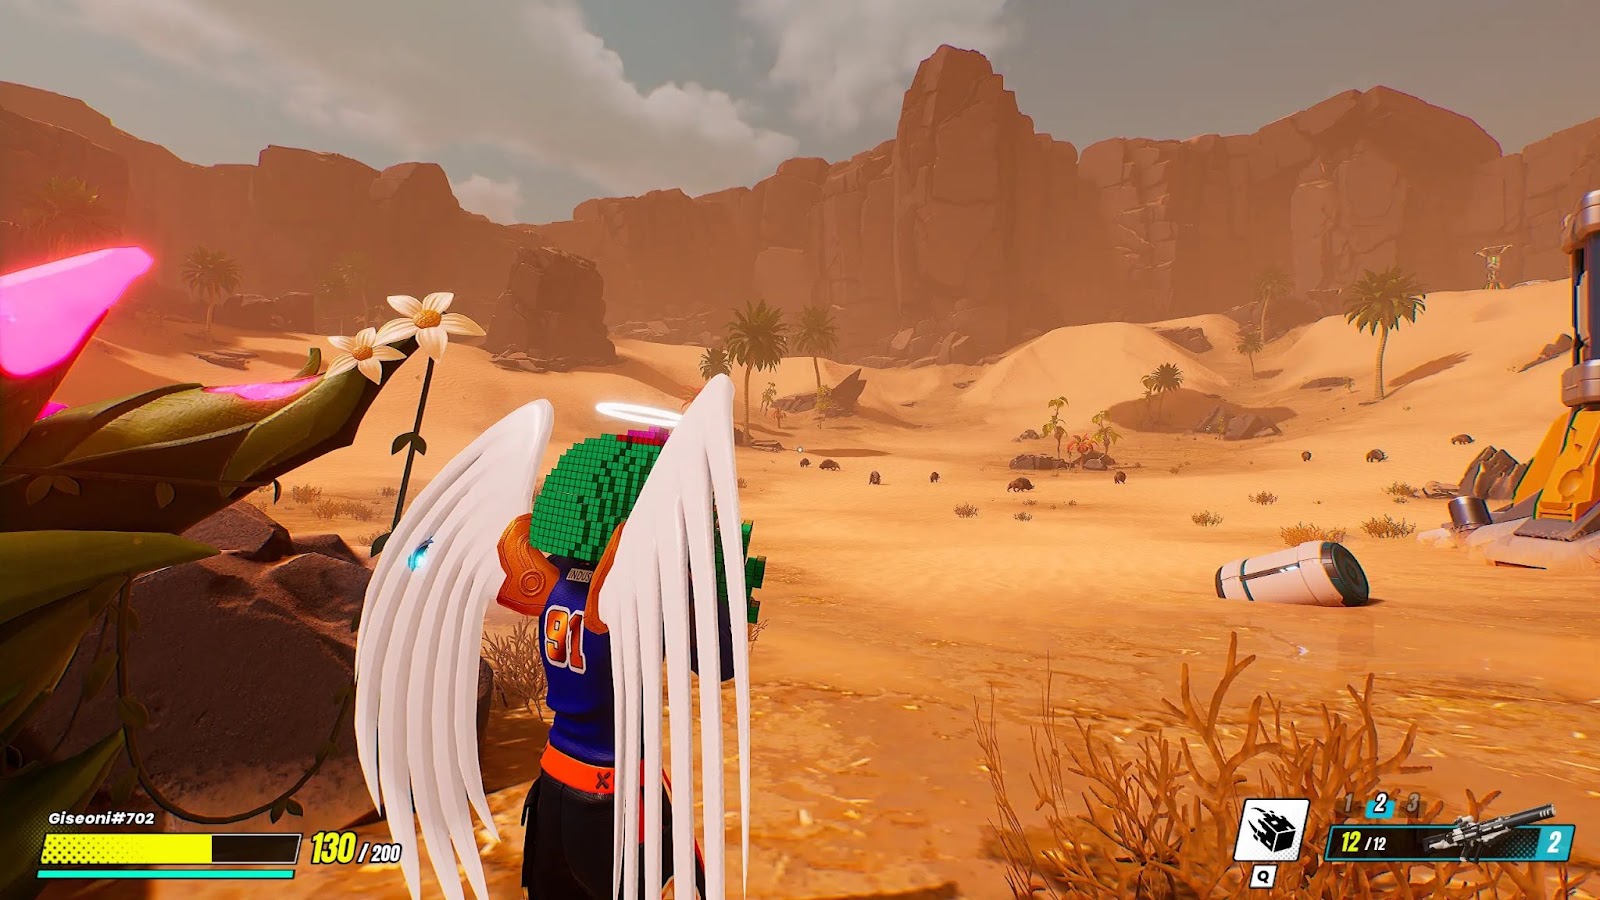 screen capture from game showing a desert landscape